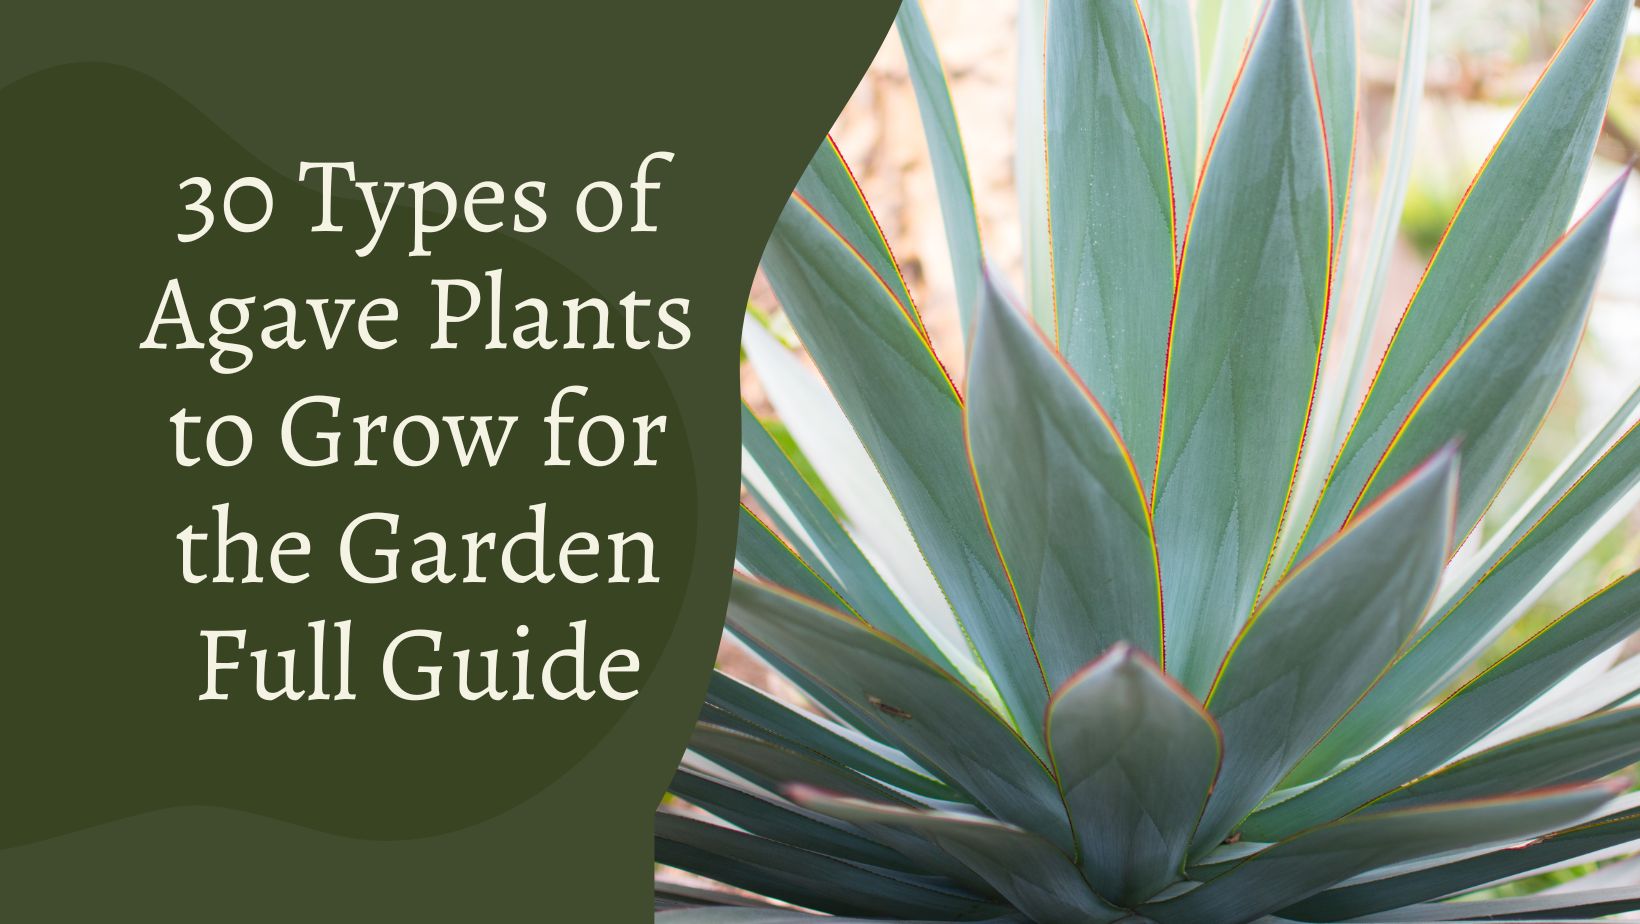 30 Types of Agave Plants